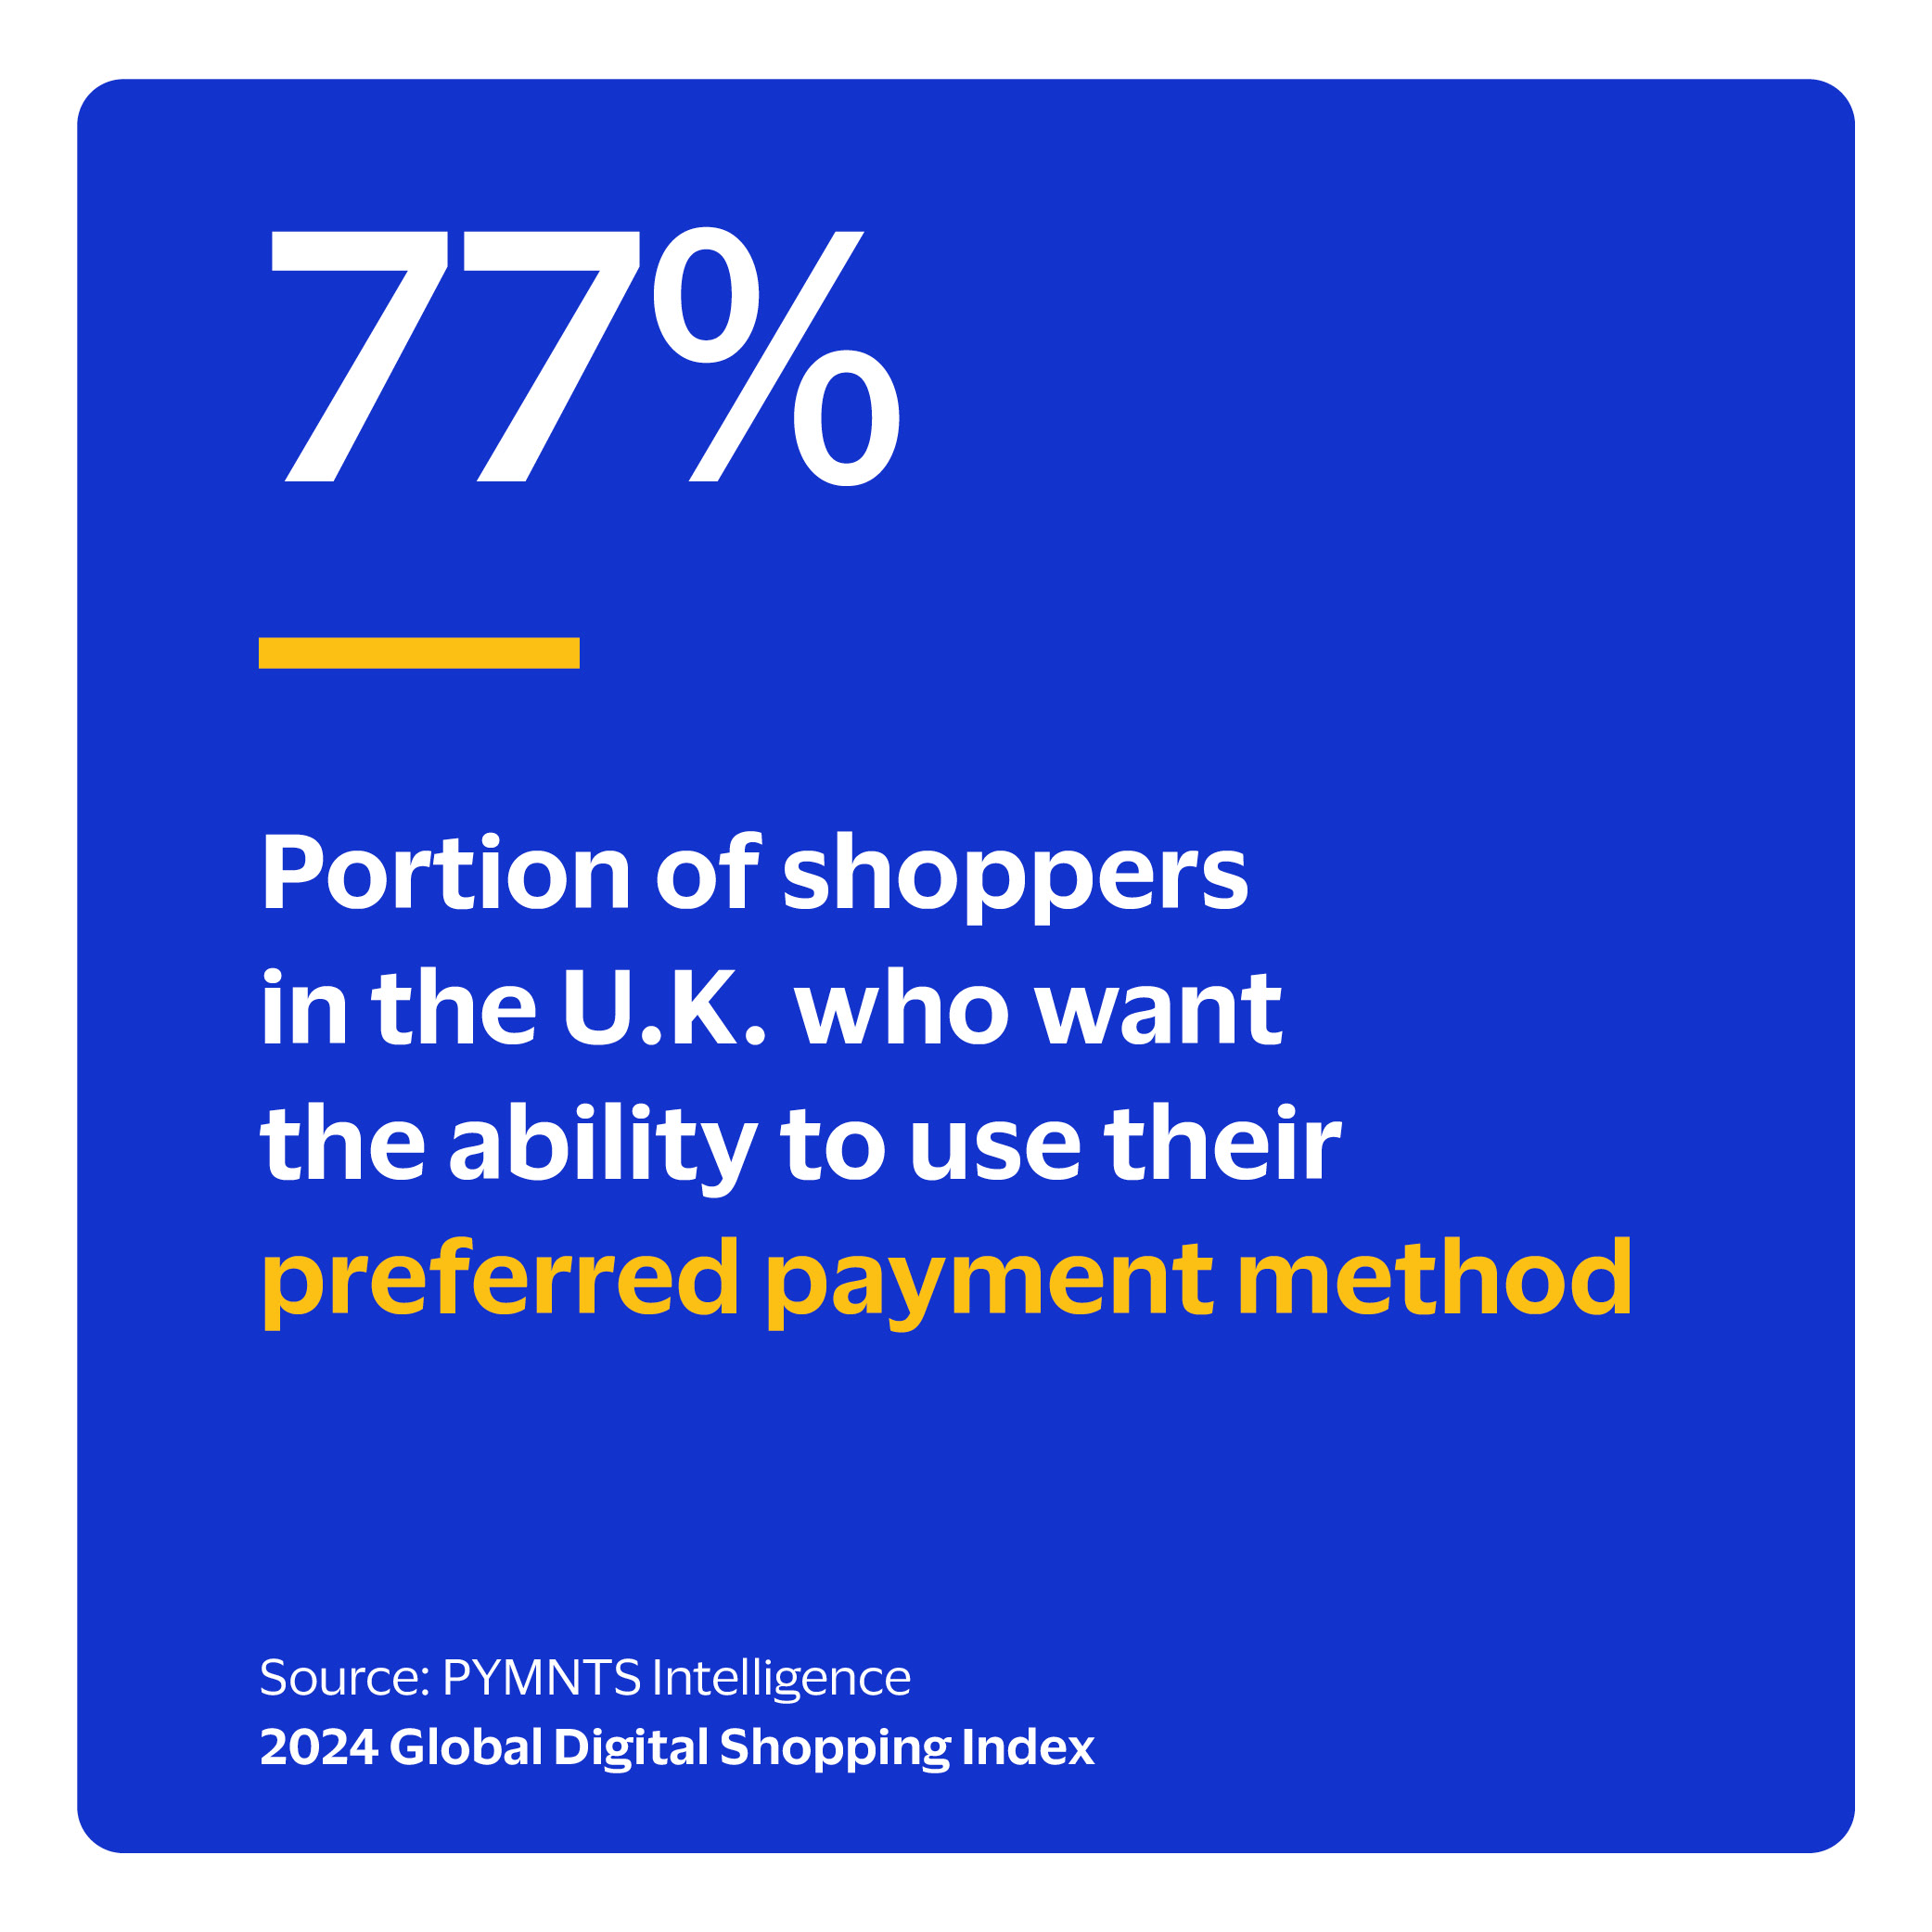 77%: Portion of shoppers in the U.K. who want the ability to use their preferred payment method